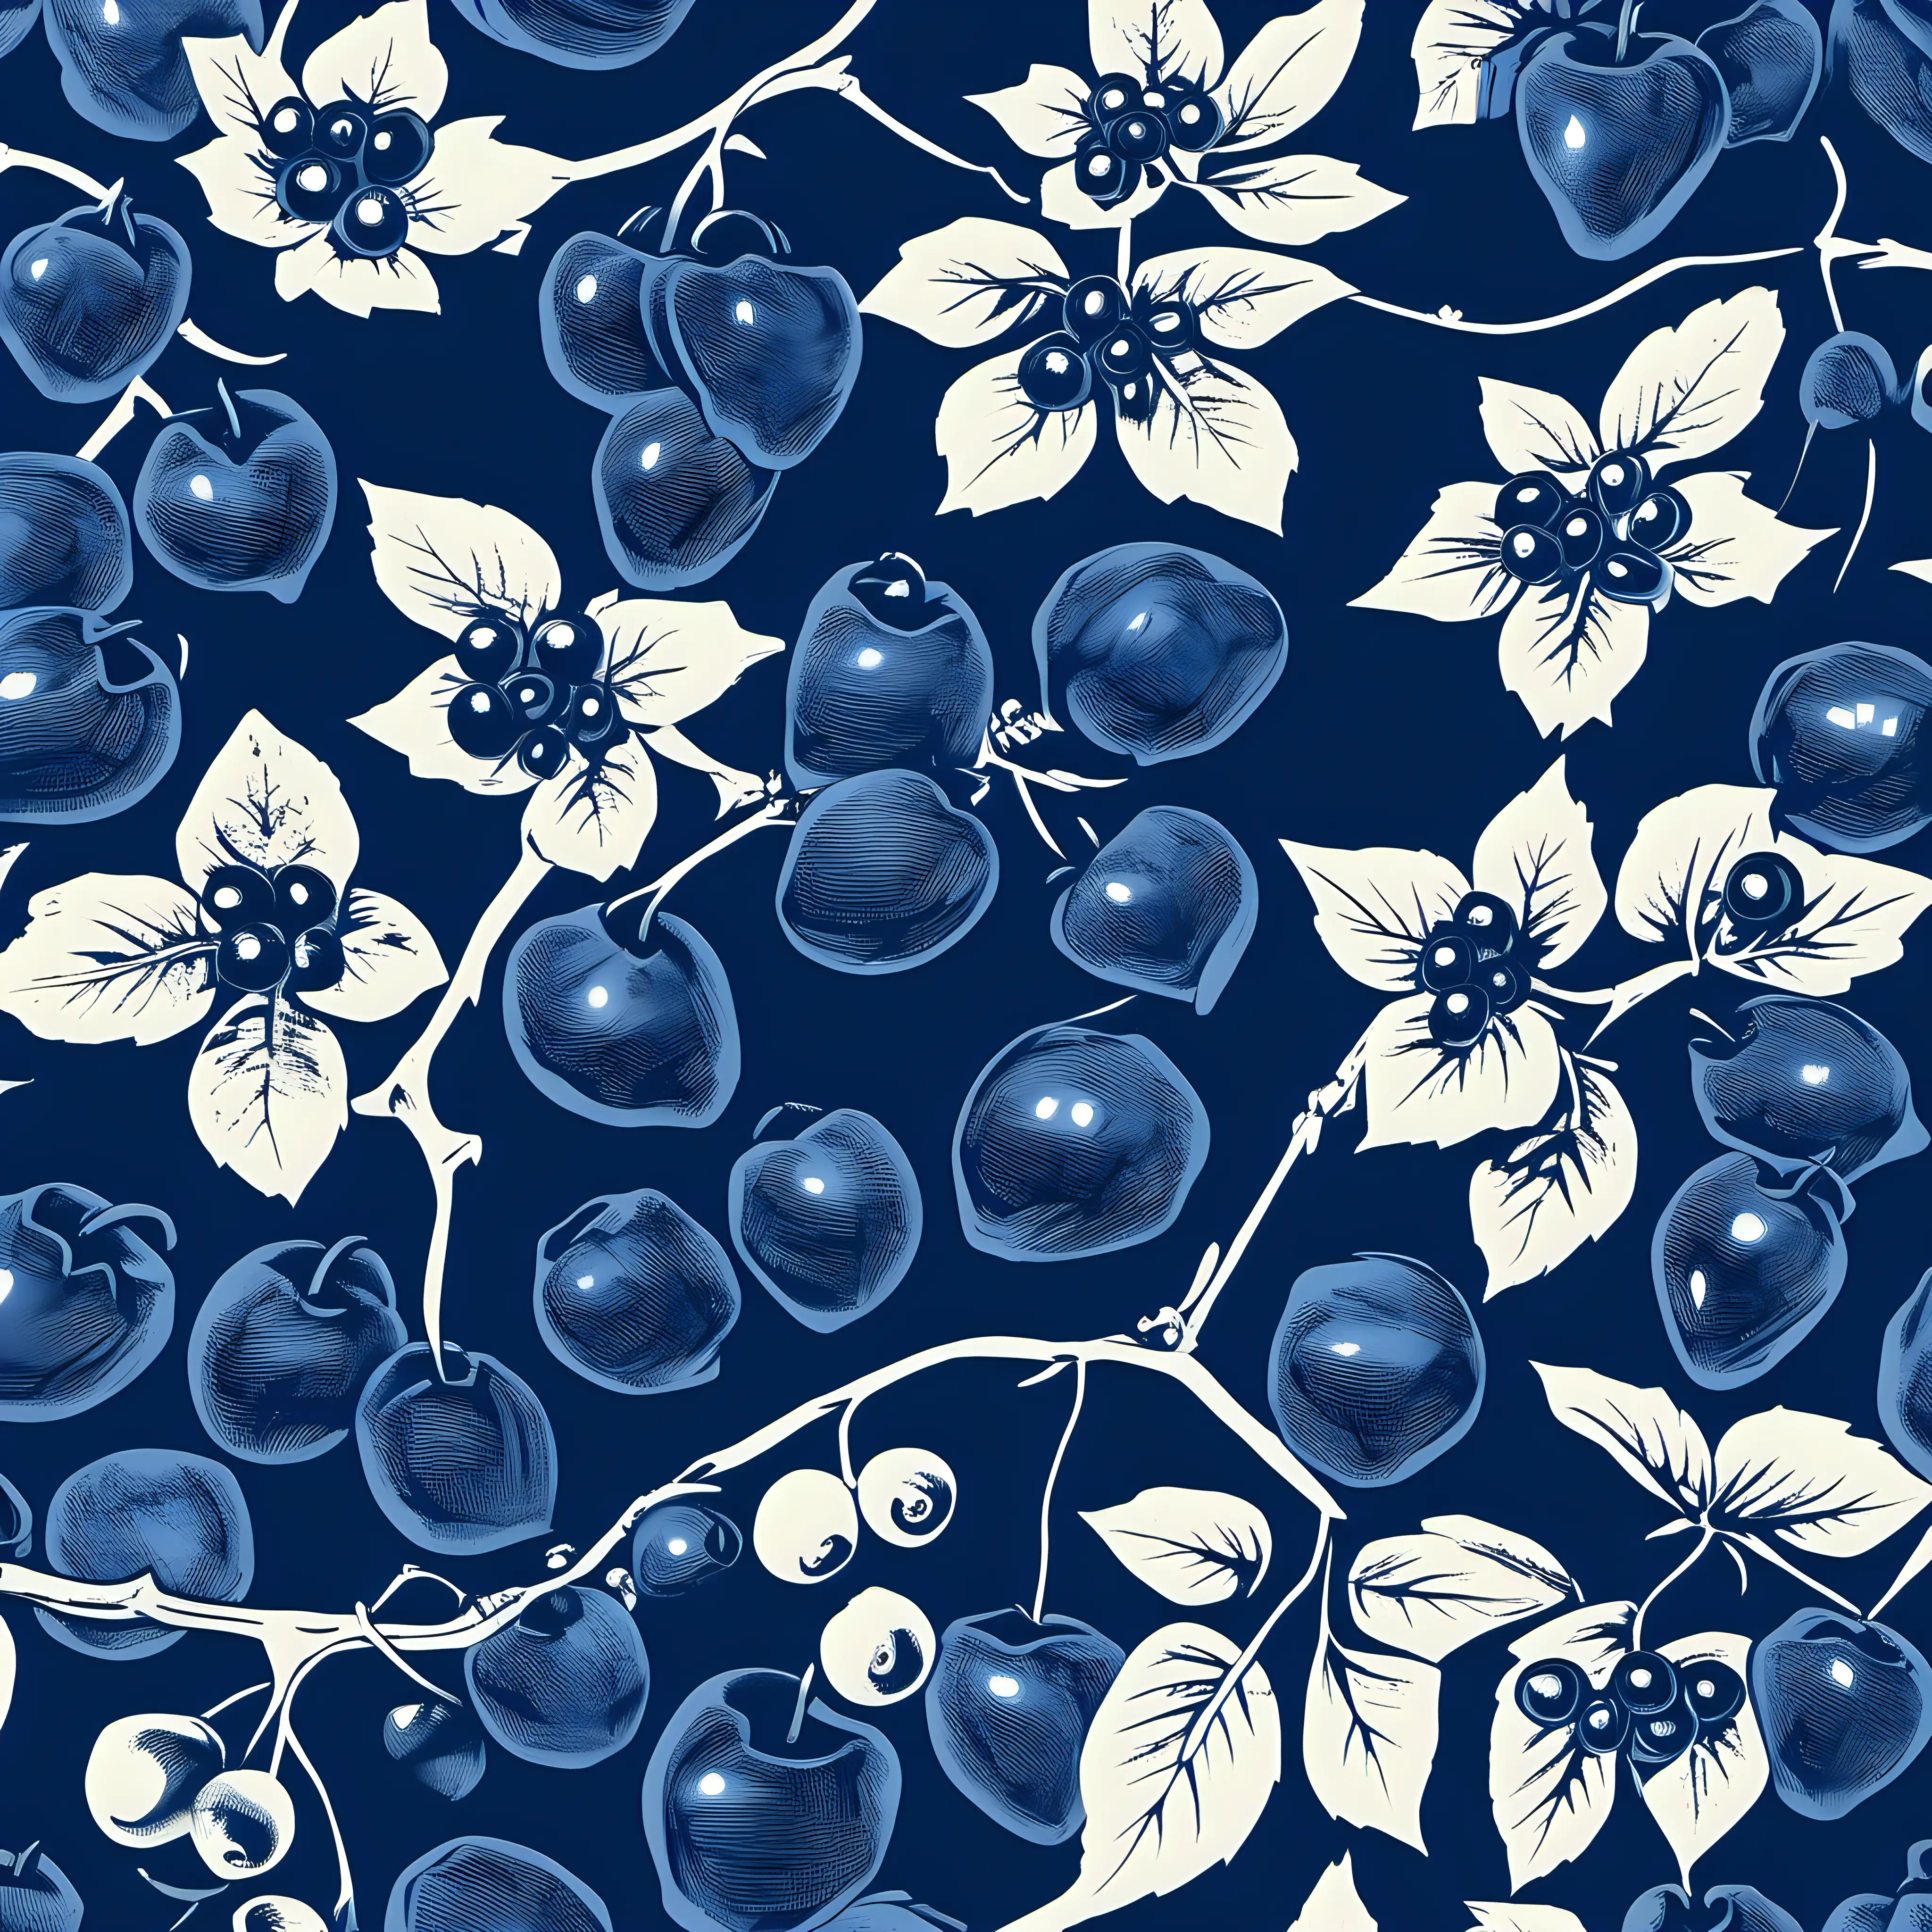 /imagine prompt HAND PRINTED, MANY SMALL  BLUEBERRYS ON THE VINE, BLUE, BOTANIC ELEGANCE, ANDY WARHOL INSPIRED